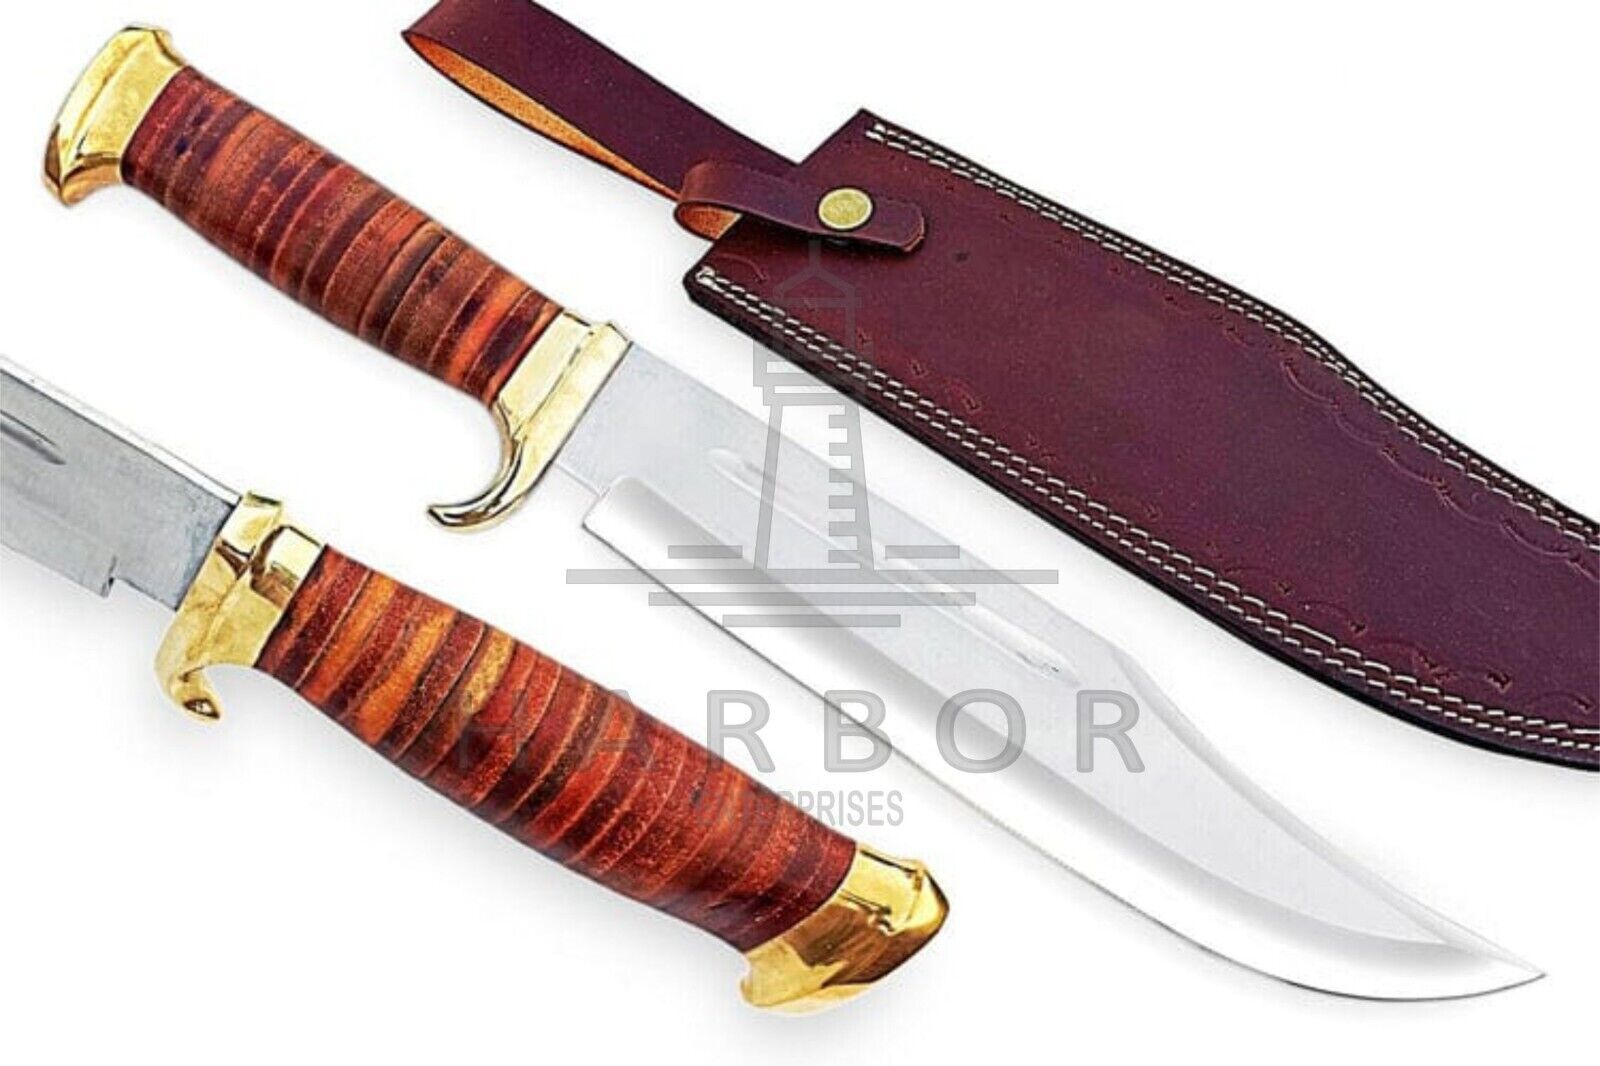 Fancy Custom Handmade Stainless Steel Bowie Knife: Craftsmanship for Collectors